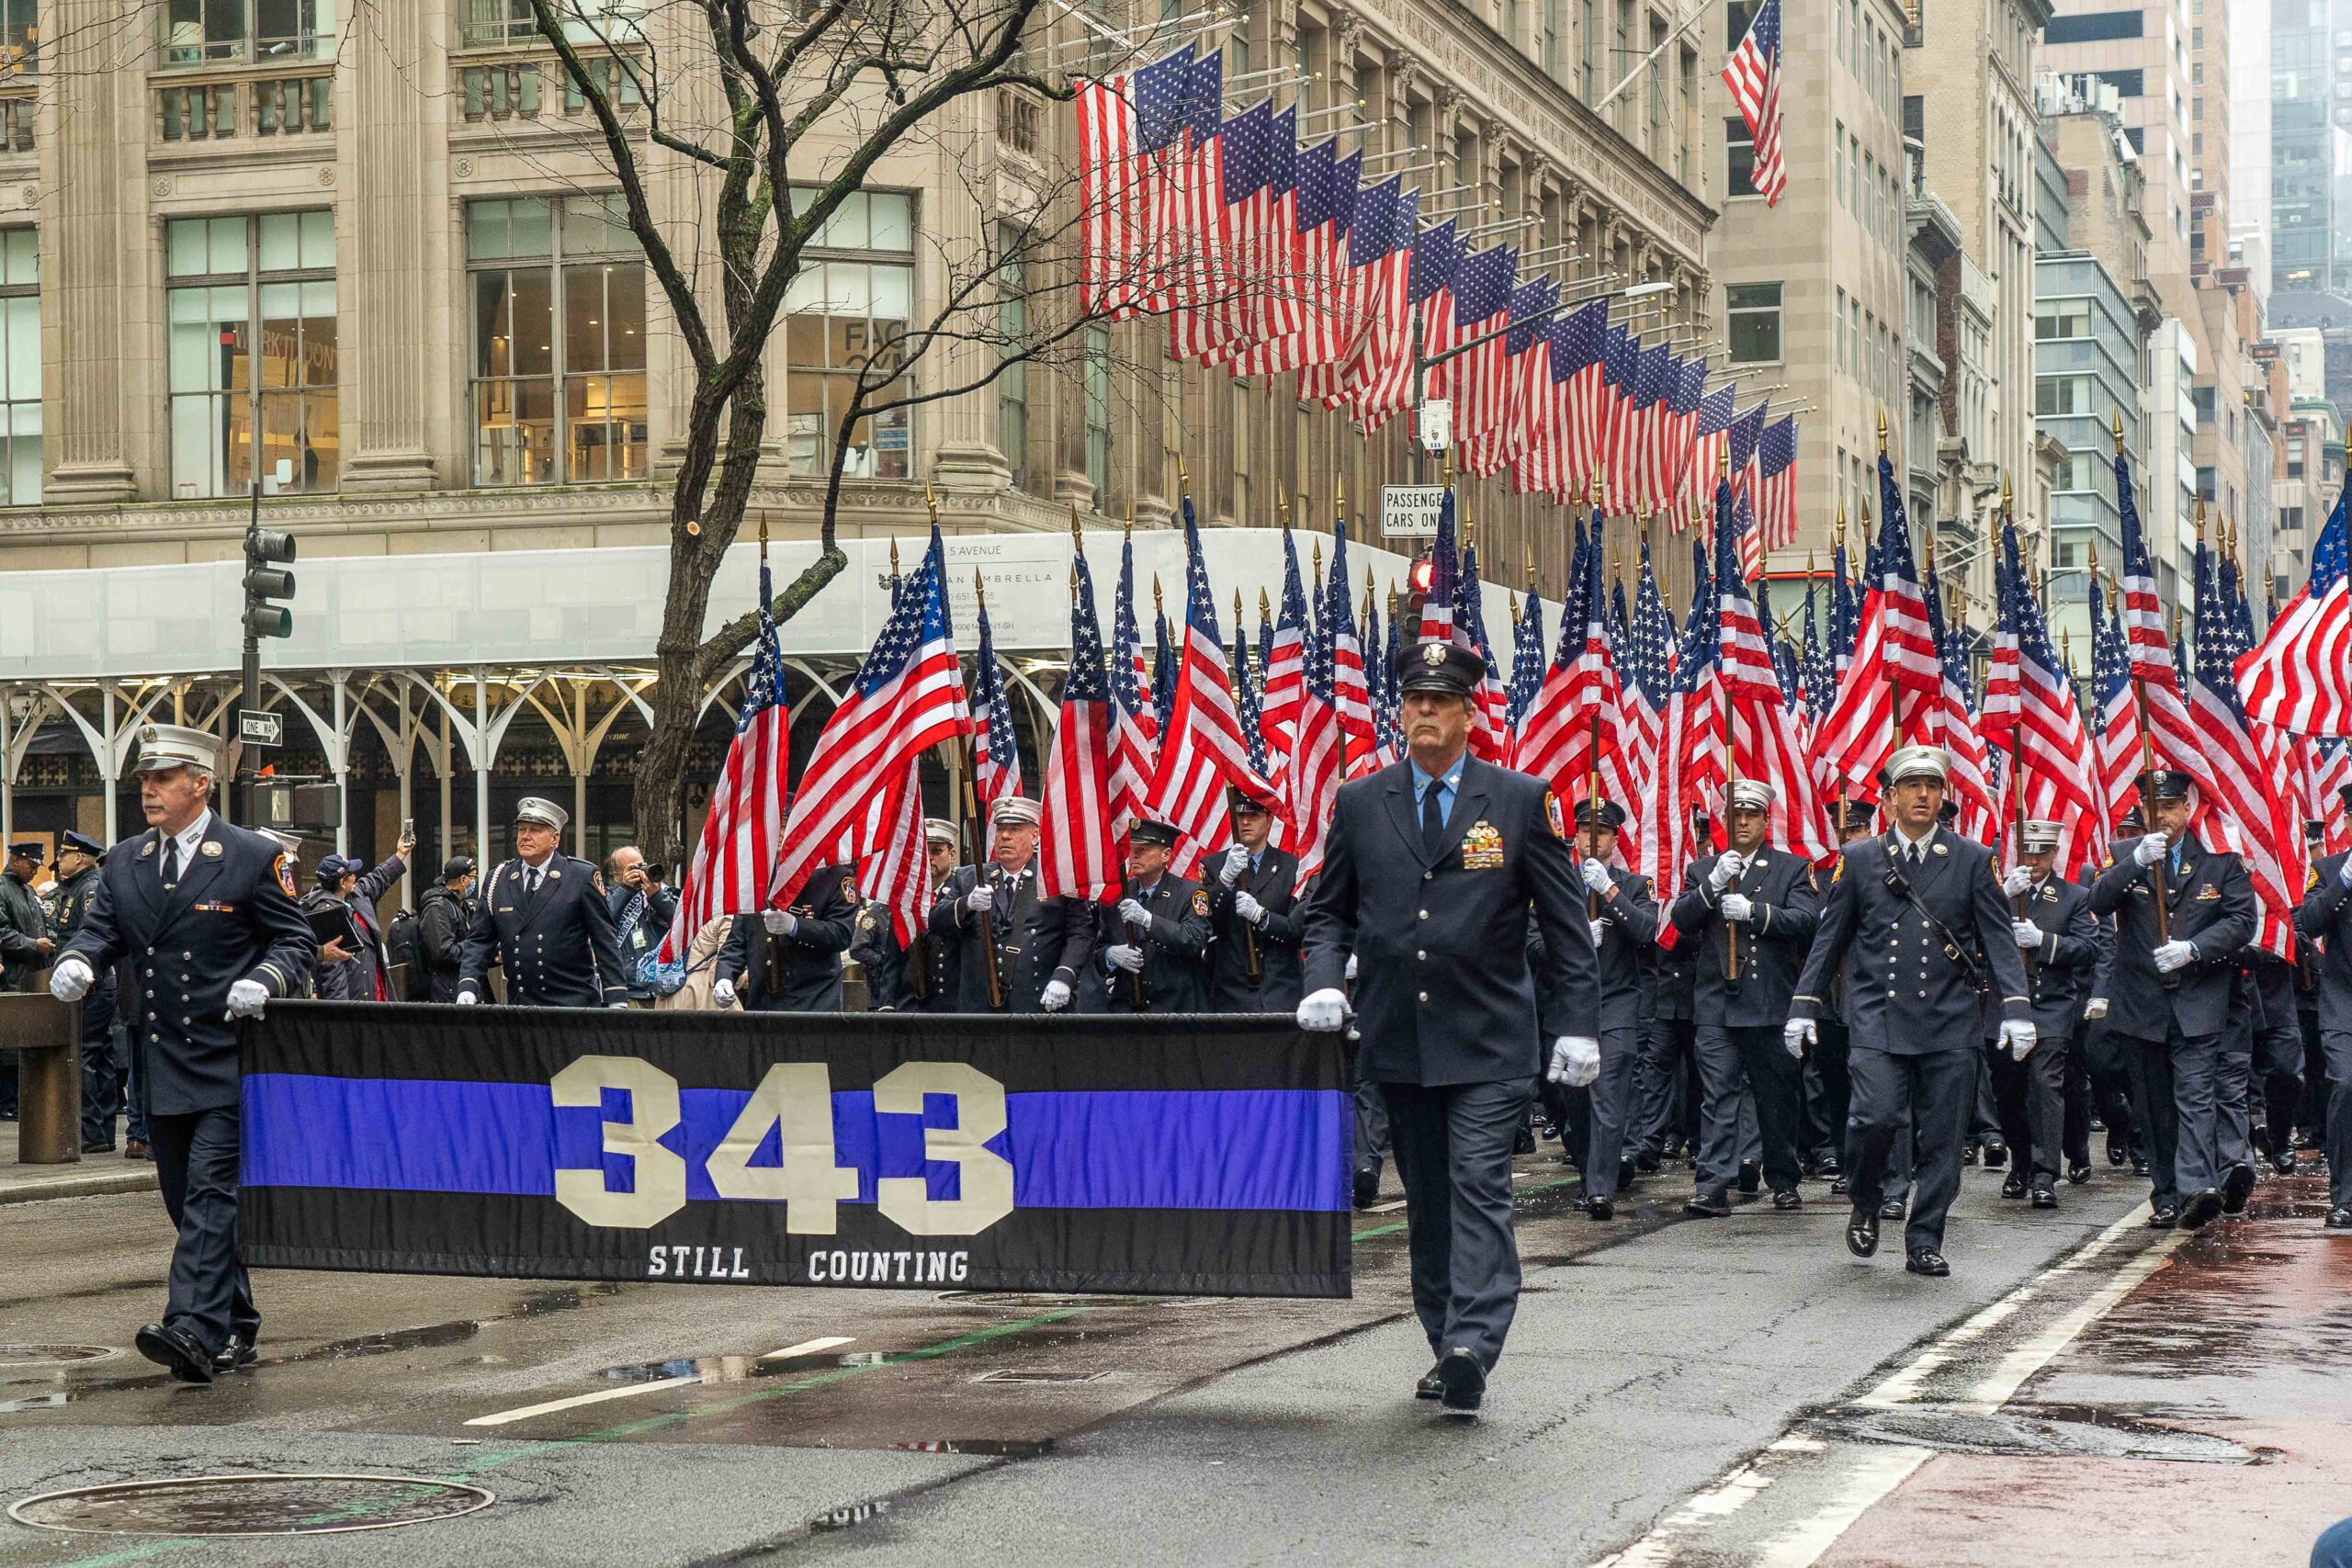 Acting FDNY Commissioner Laura Kavanagh, Acting Chief of Department John Hodgens and FDNY members marched in the New York City Saint Patricks Day Parade along Fifth Avenue in Manhattan.